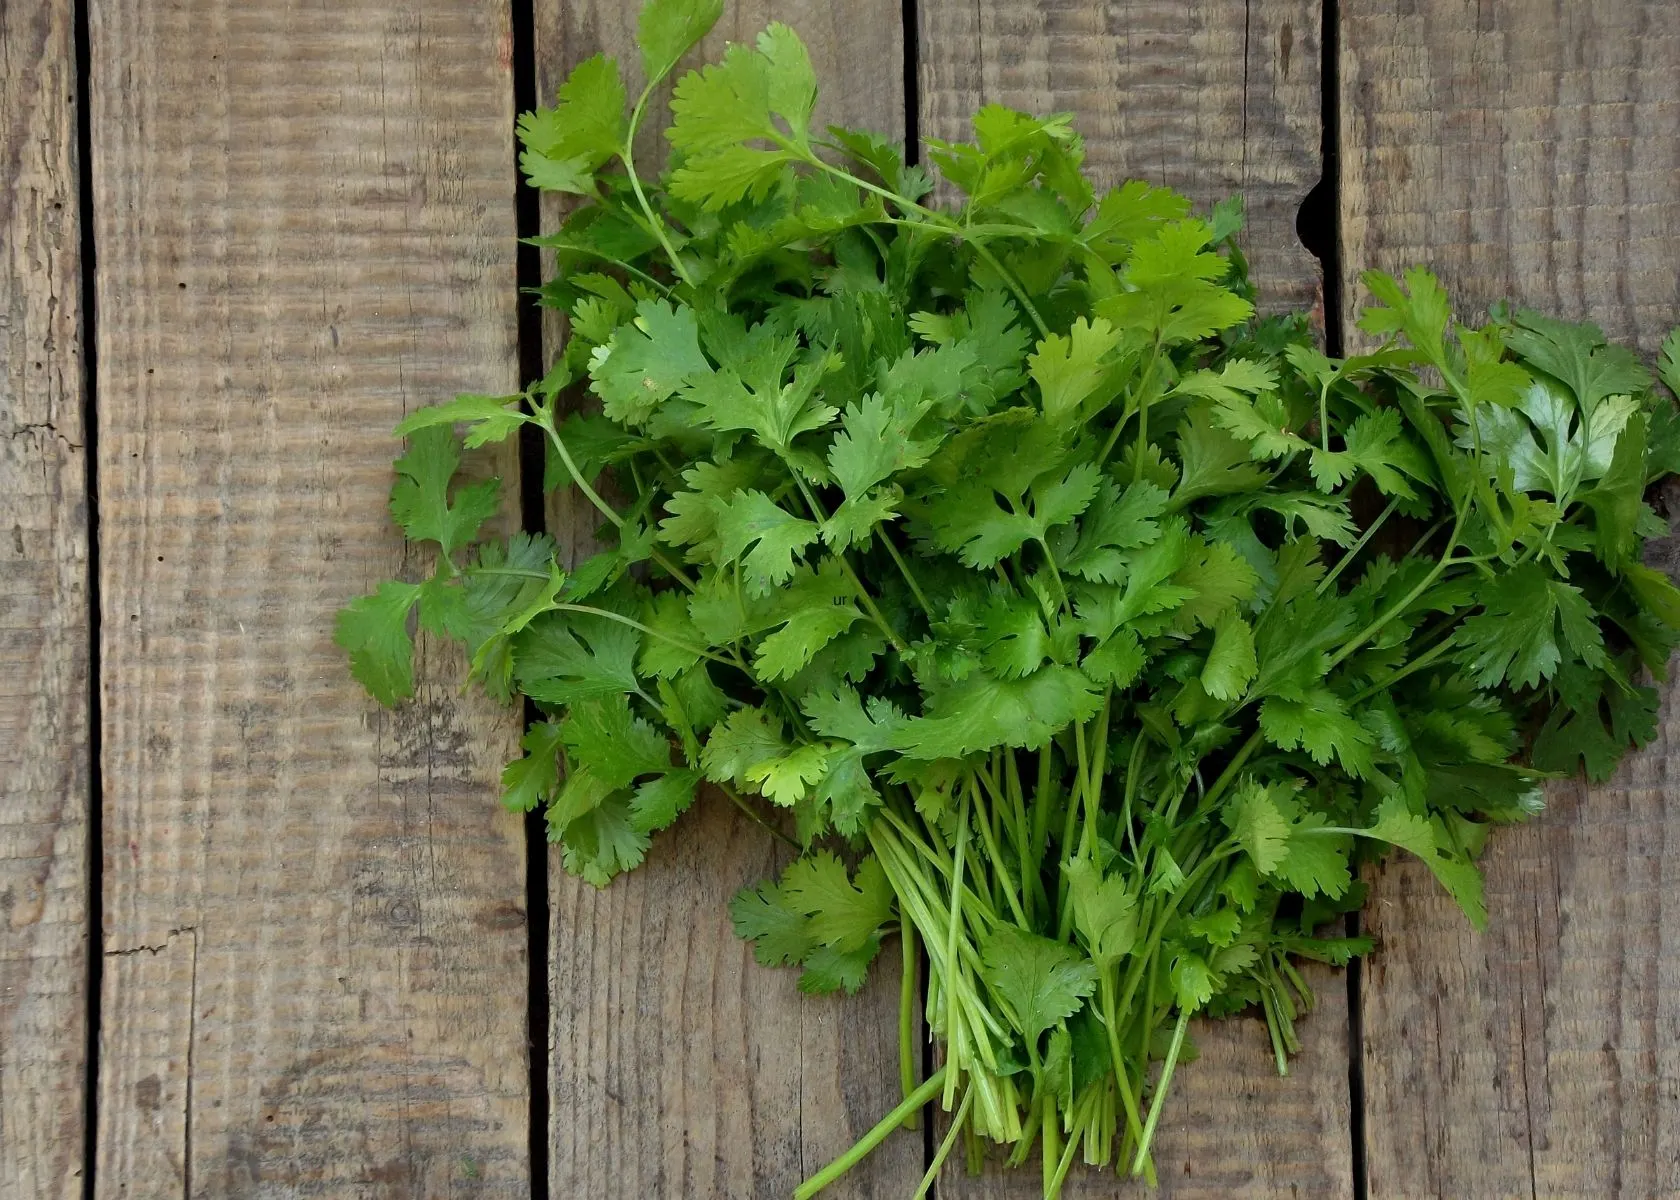 Large brunch of fresh, vibrant green cilantro on rustic wooden table top.